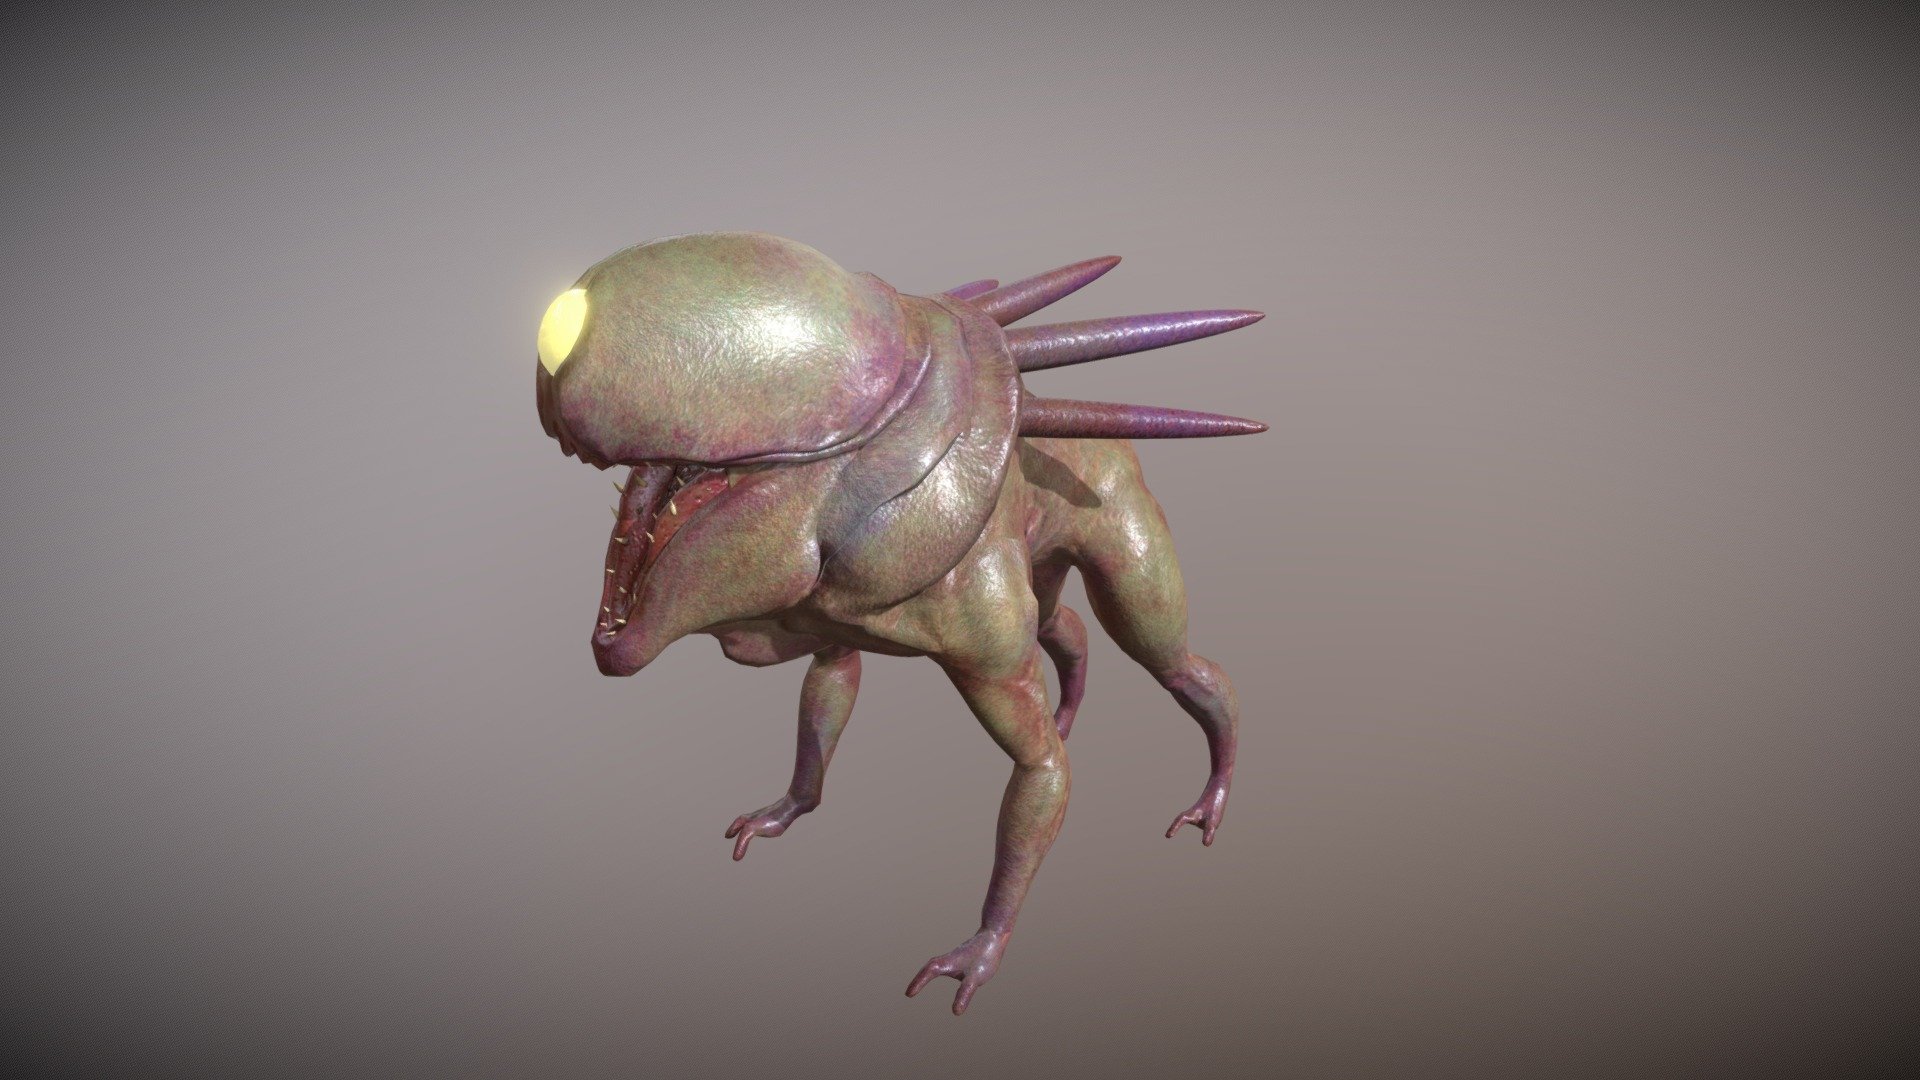 Alien I designed and modeled for a survival/Horror game in Unity.
Concept art done in Photoshop, high poly model done in Zbrush, Retopology of low poly Zremeshed version in 3dsmax, and textured in substance painter 3d model